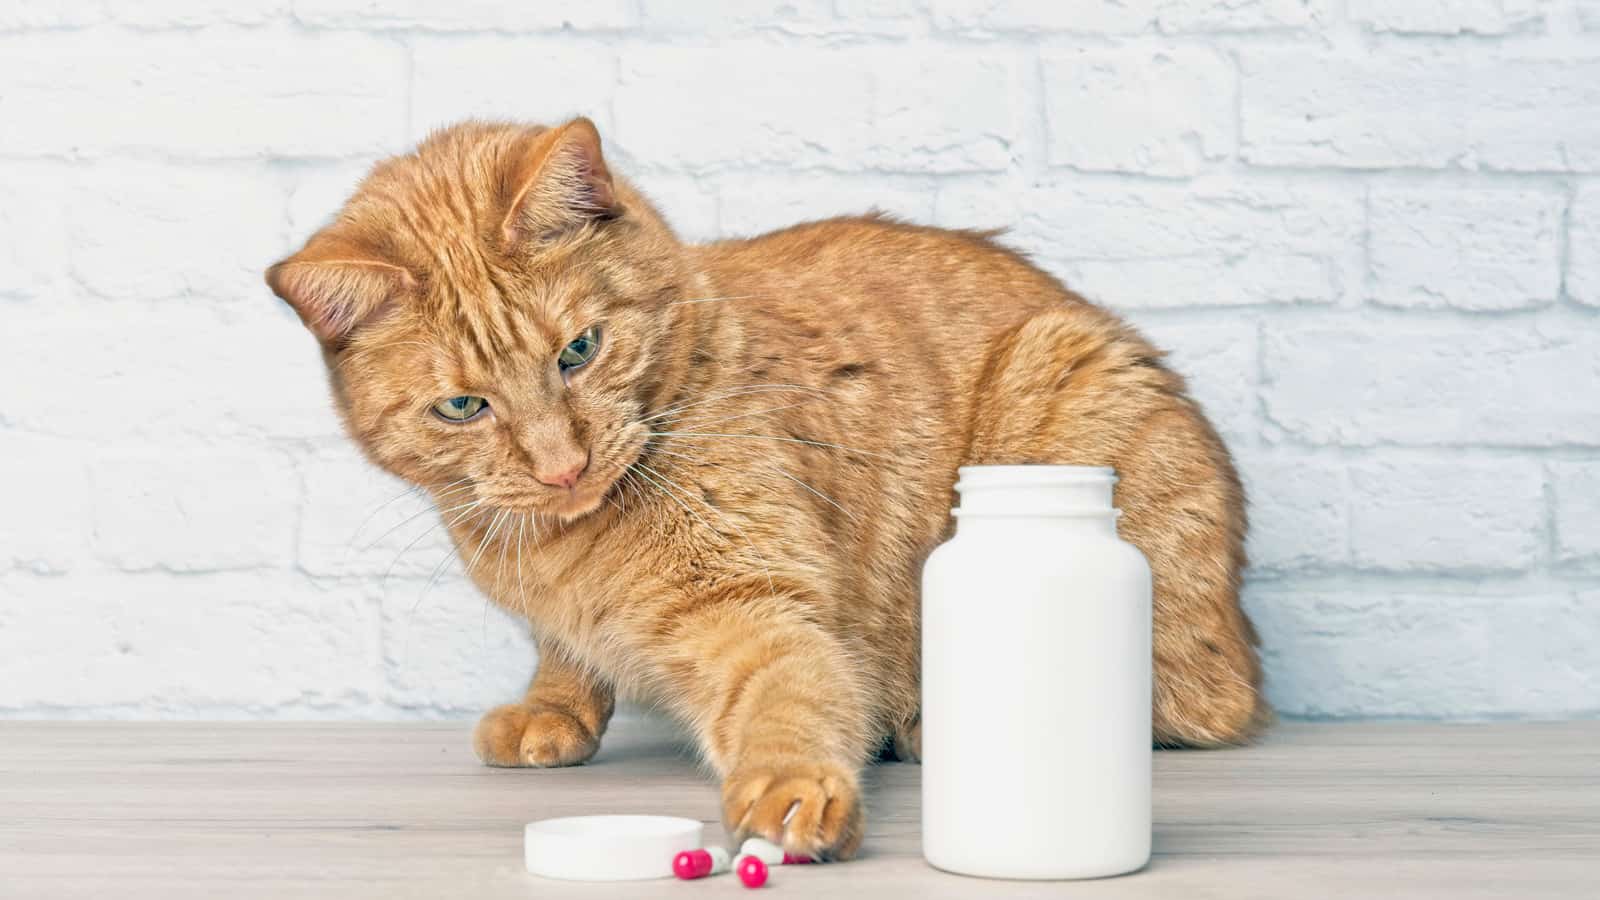 Red cat stealing household medicine capsules beside a open pill bottle.